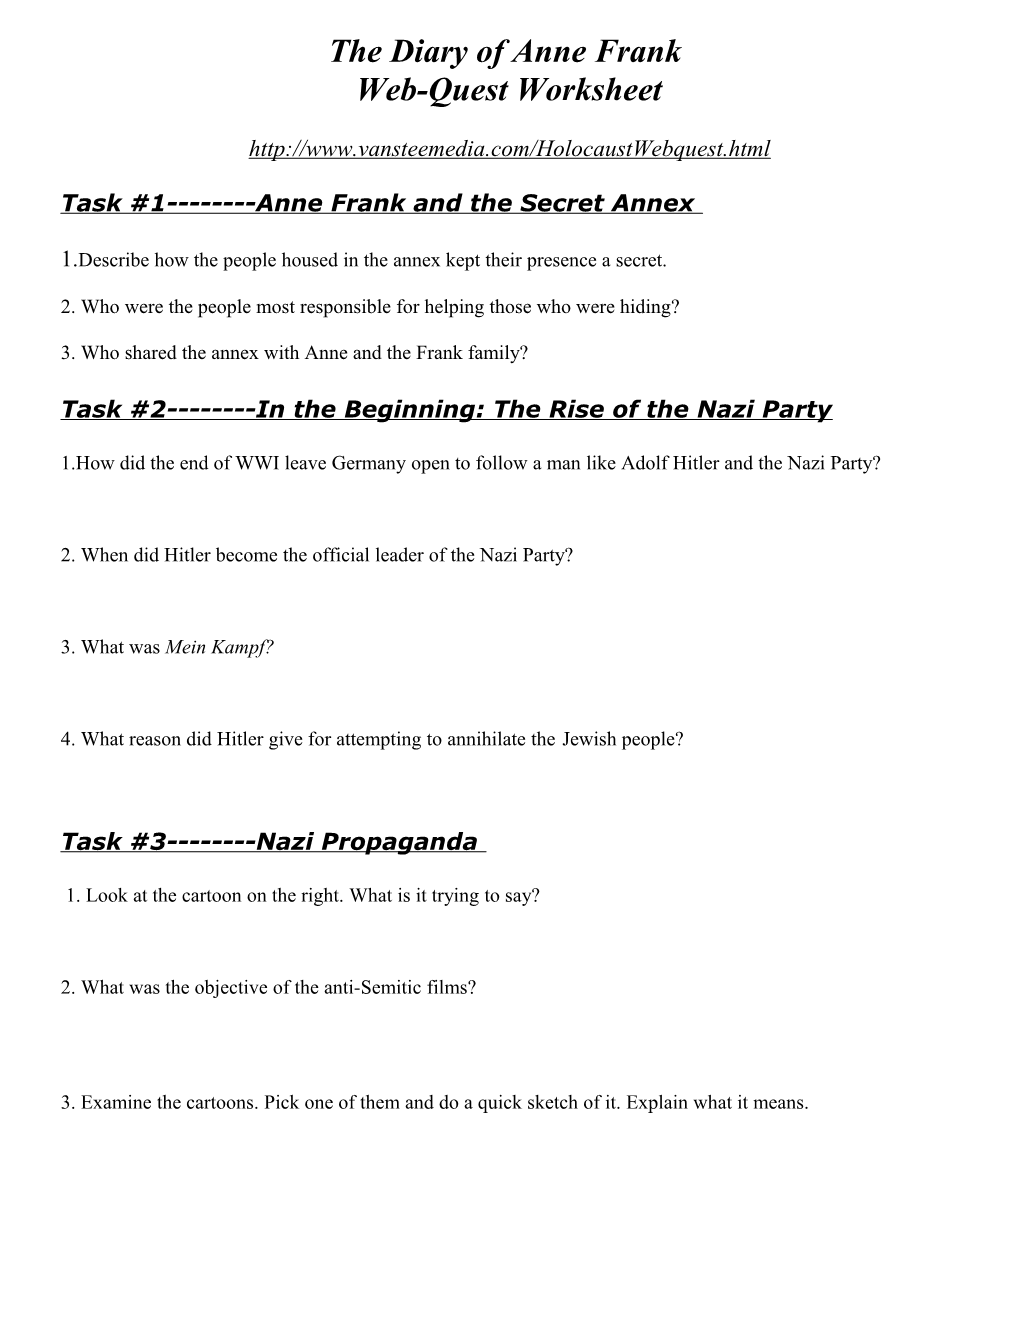 The Diary of Anne Frank Webquest Worksheet